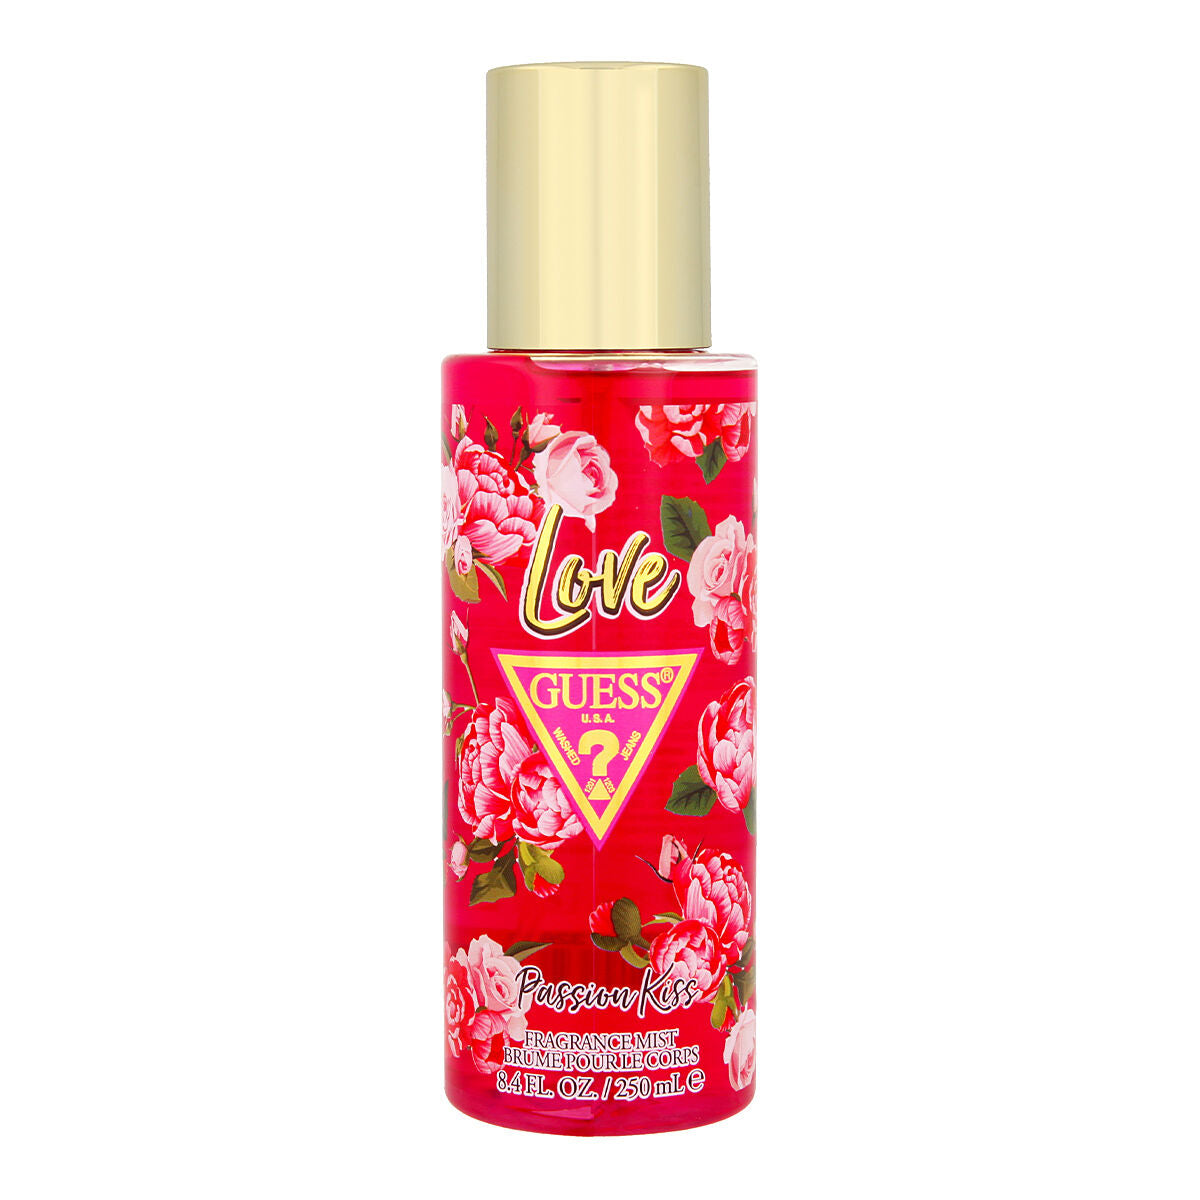 Body Spray Guess Love Passion Kiss 250 ml-0